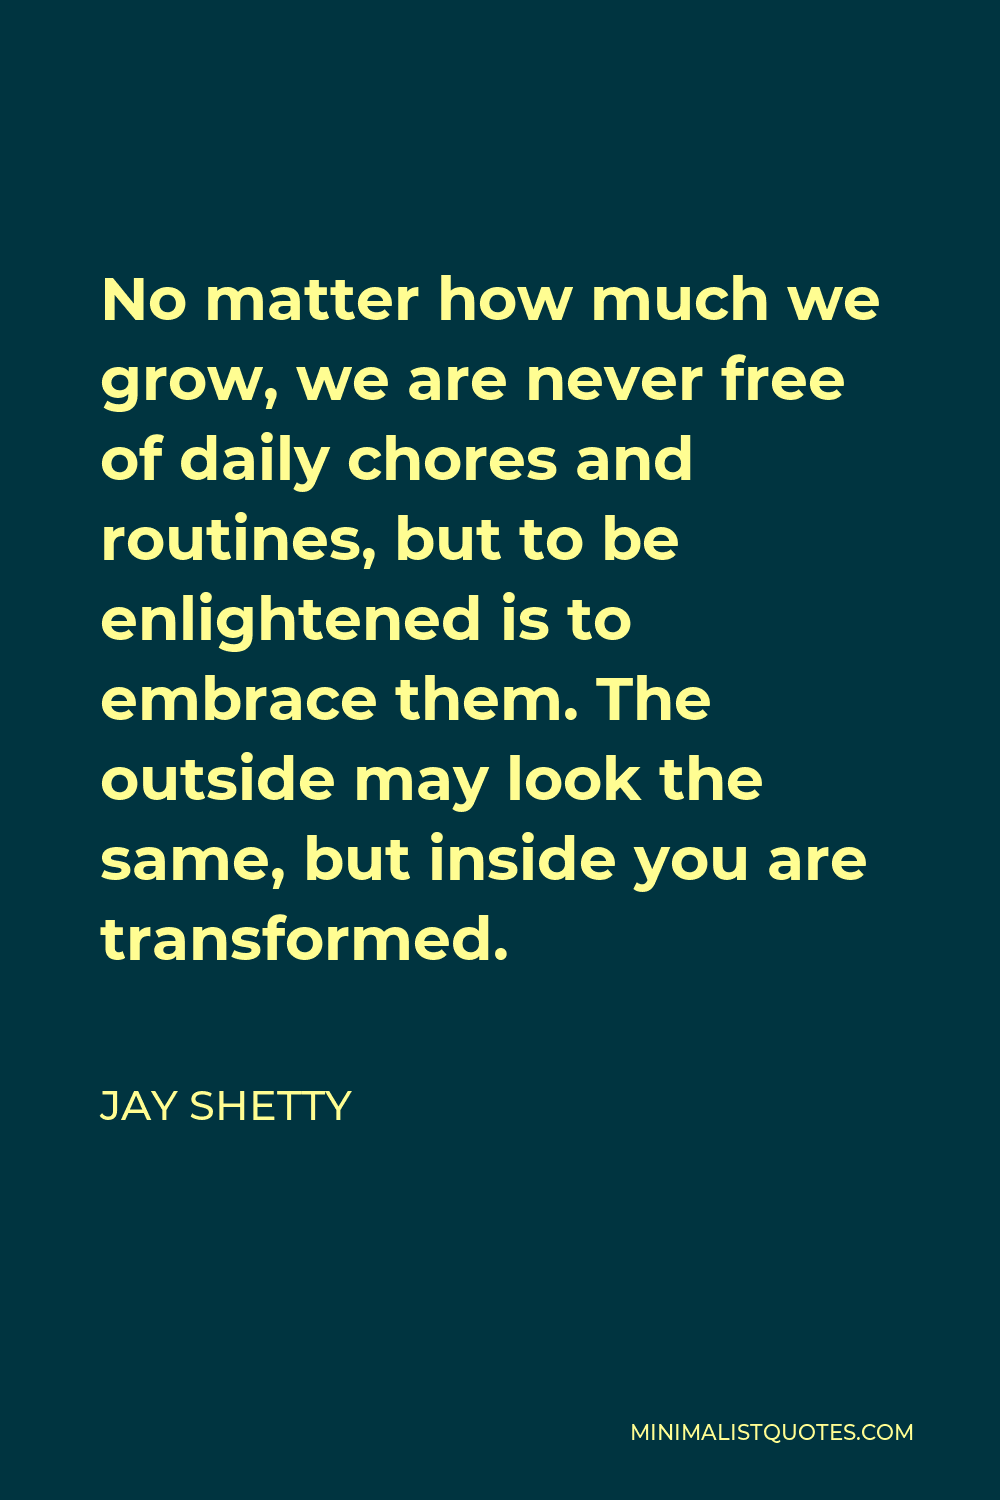 Jay Shetty Quote - No matter how much we grow, we are never free of daily chores and routines, but to be enlightened is to embrace them. The outside may look the same, but inside you are transformed.